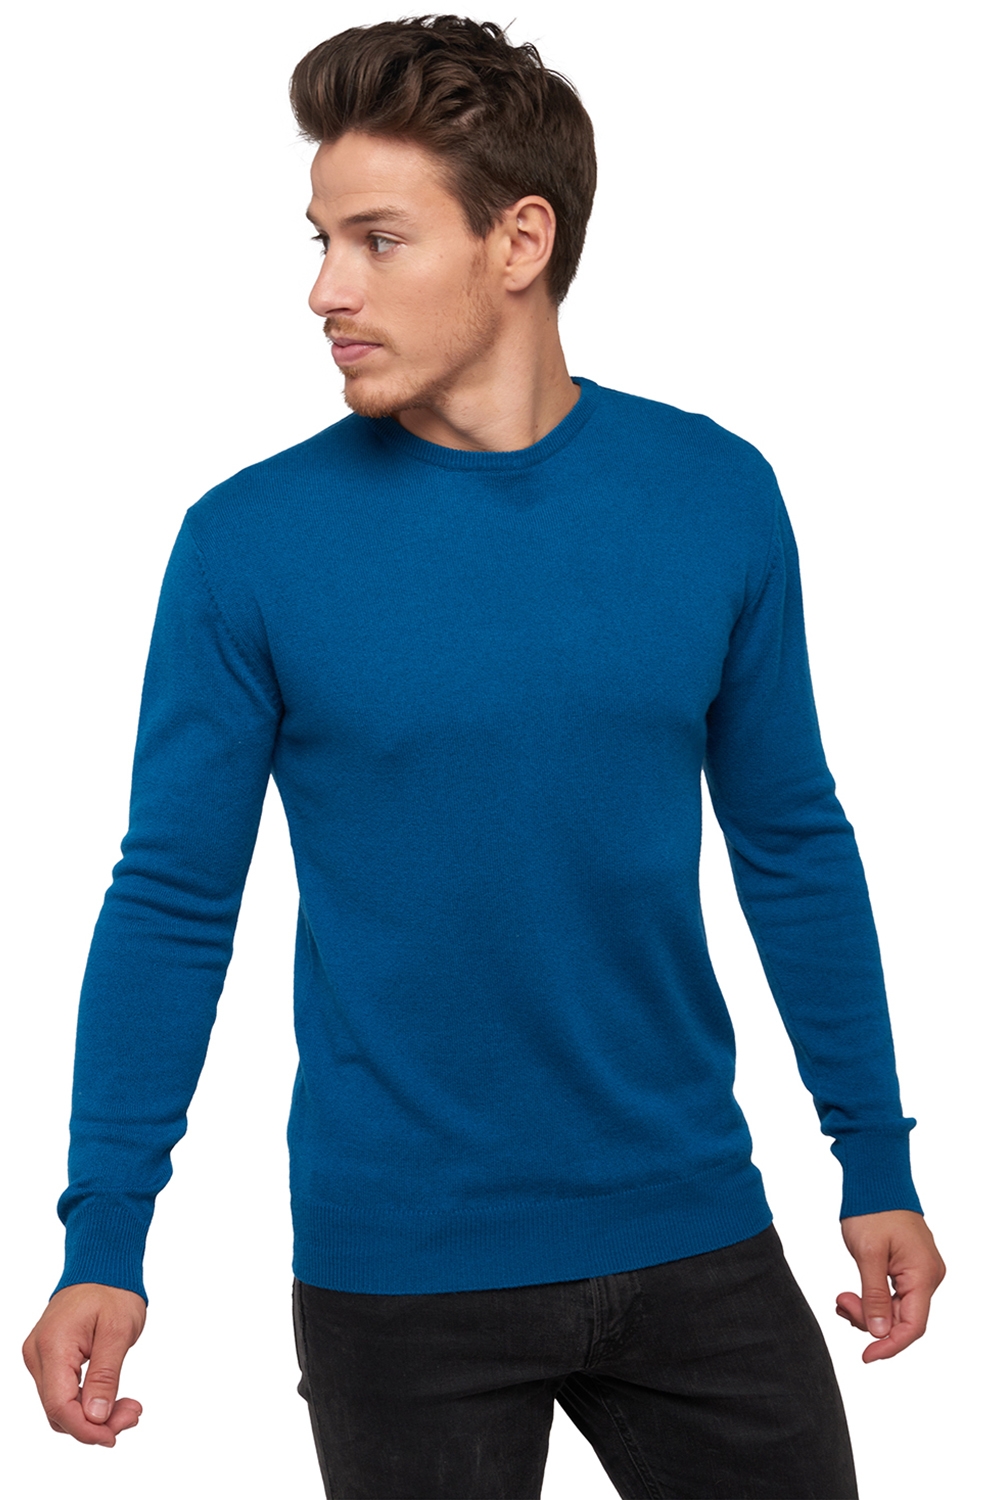 Cachemire pull homme col rond keaton bleu canard l